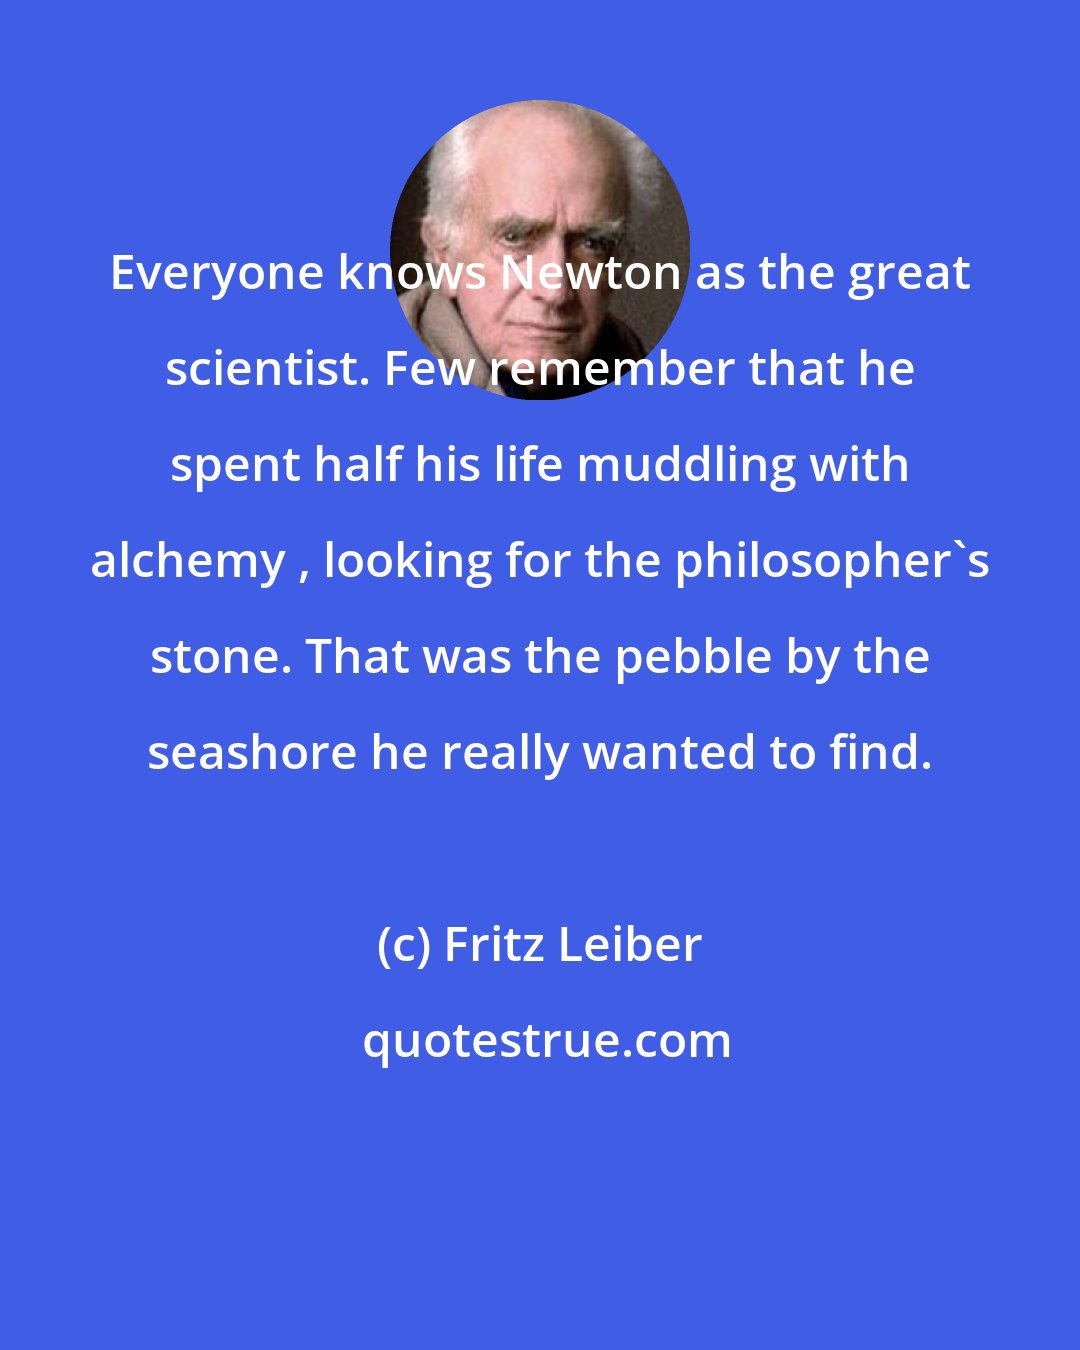 Fritz Leiber: Everyone knows Newton as the great scientist. Few remember that he spent half his life muddling with alchemy , looking for the philosopher's stone. That was the pebble by the seashore he really wanted to find.